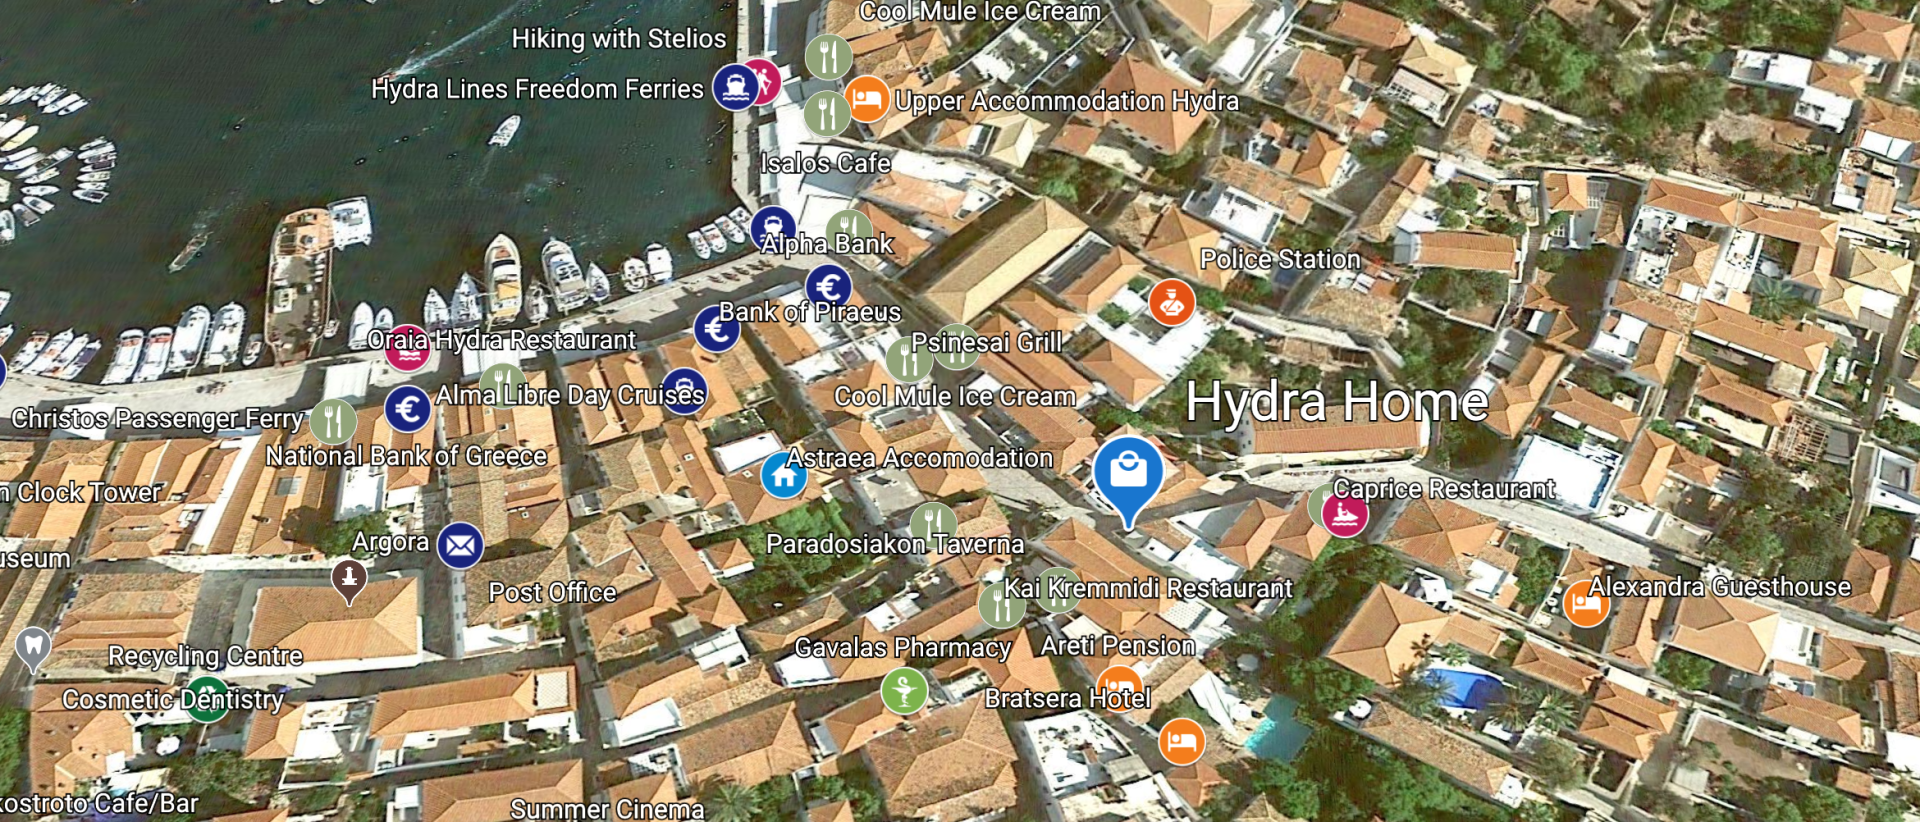 Map to find the Hydra Home shop on the Greek Island of Hydra.